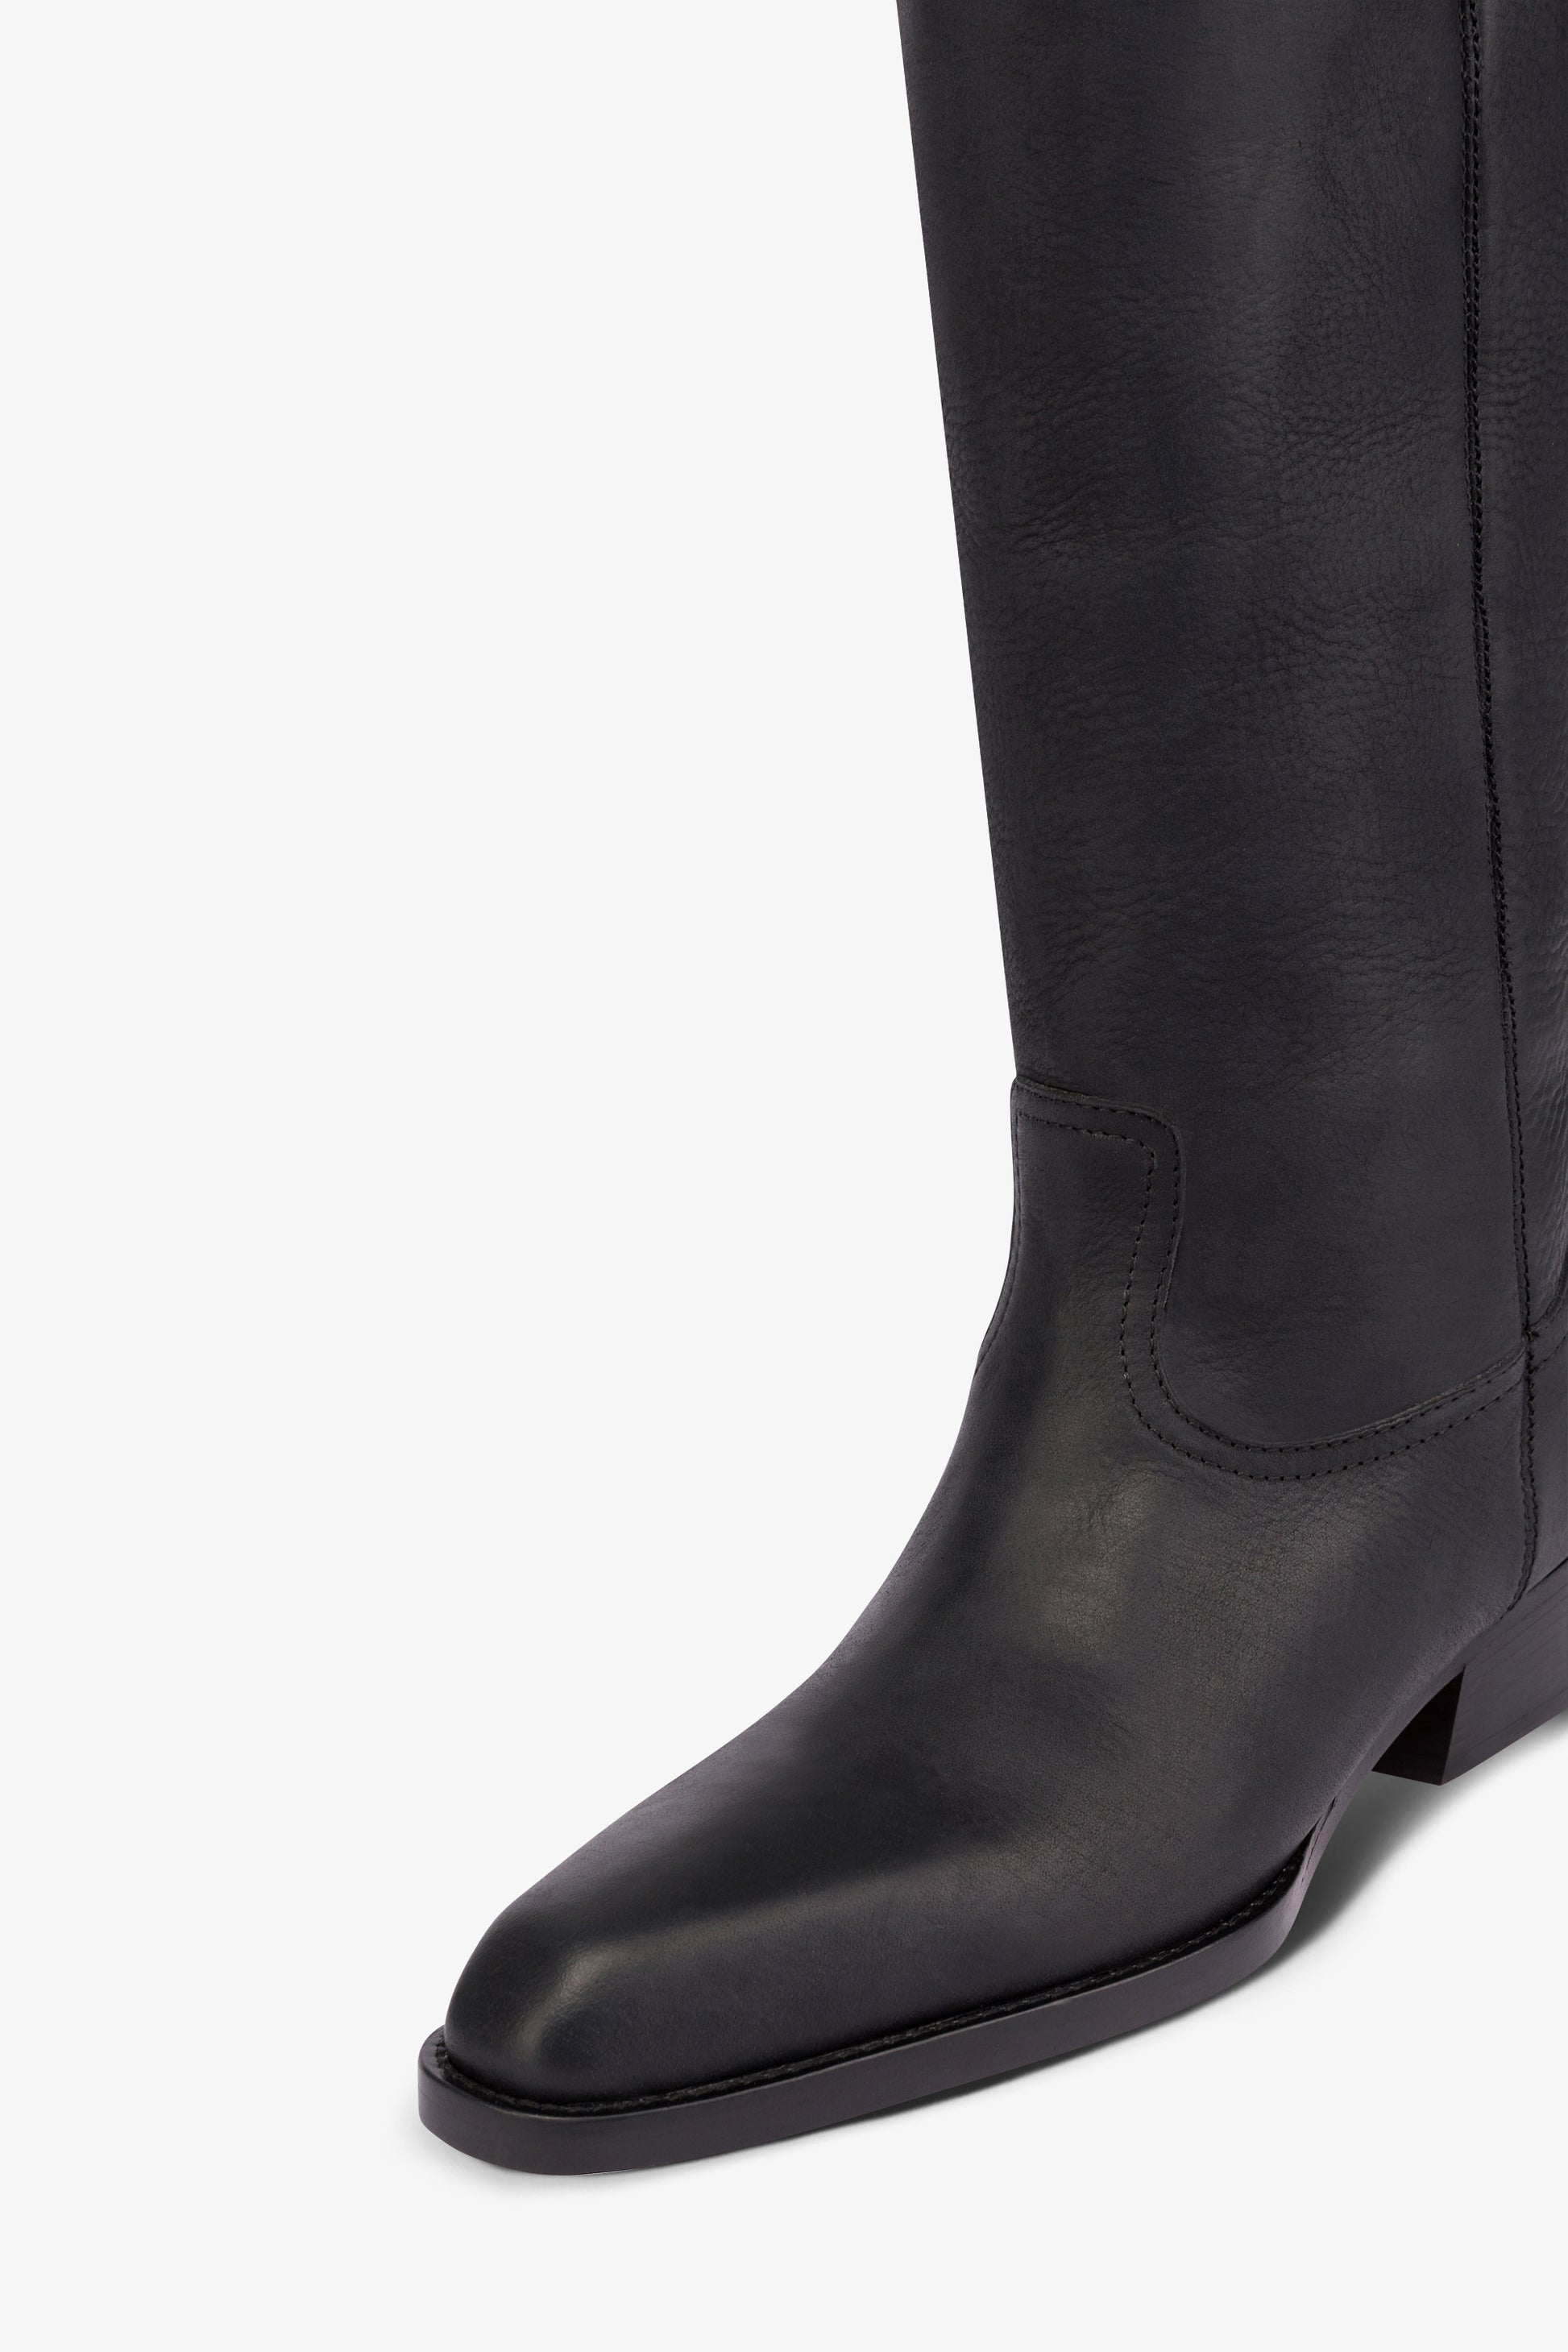 Calf-length boots in soft black pebble leather